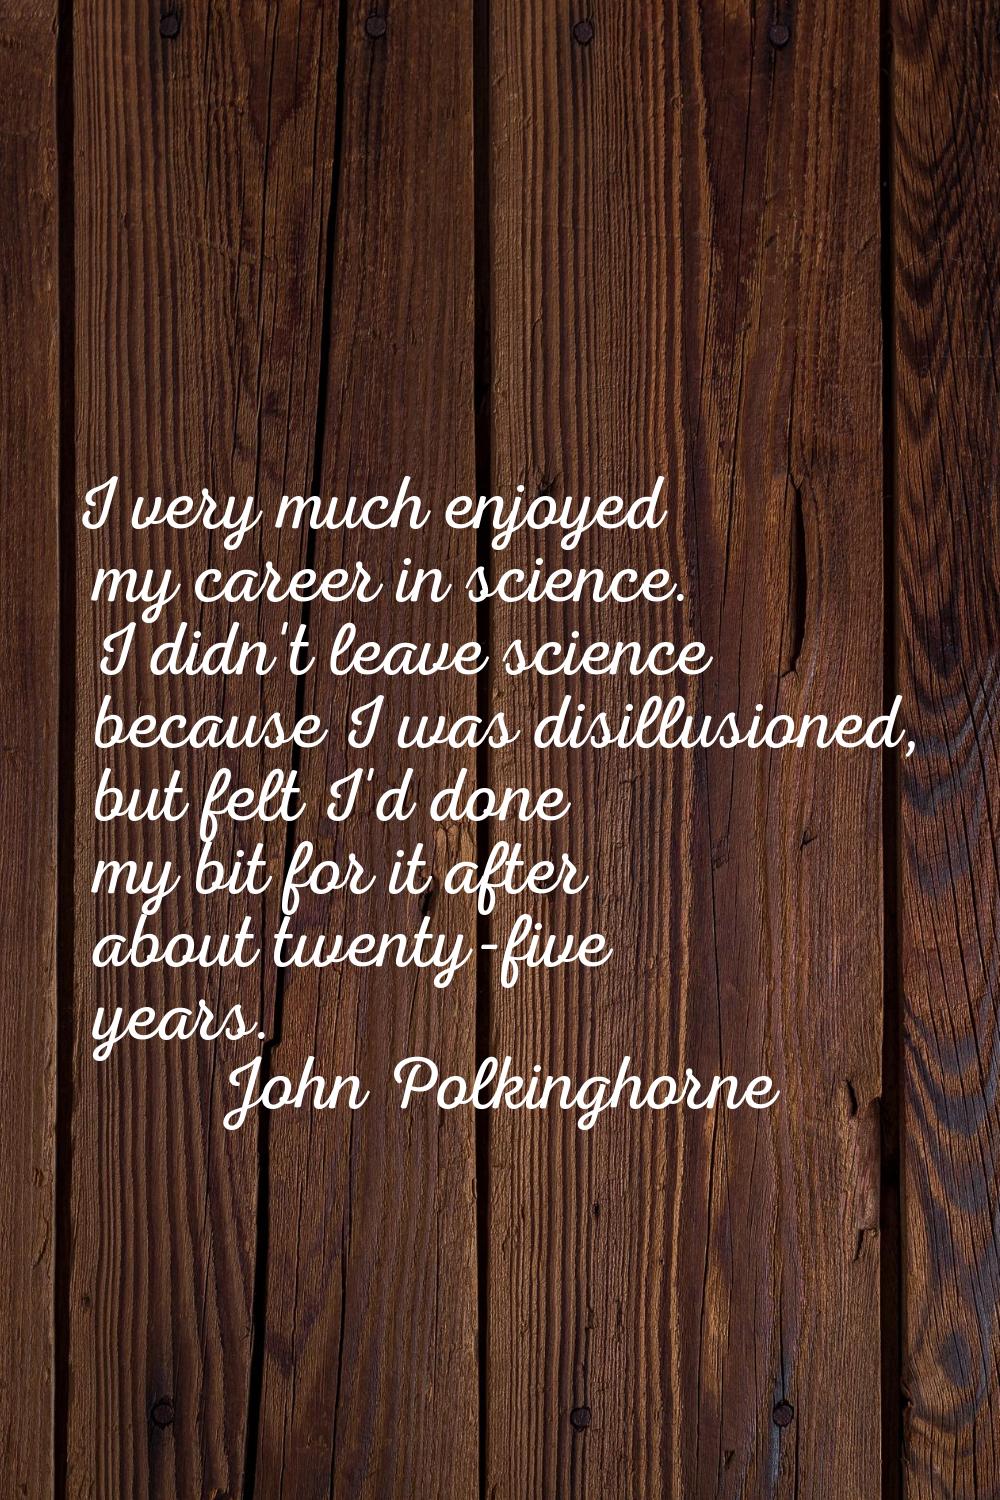 I very much enjoyed my career in science. I didn't leave science because I was disillusioned, but f